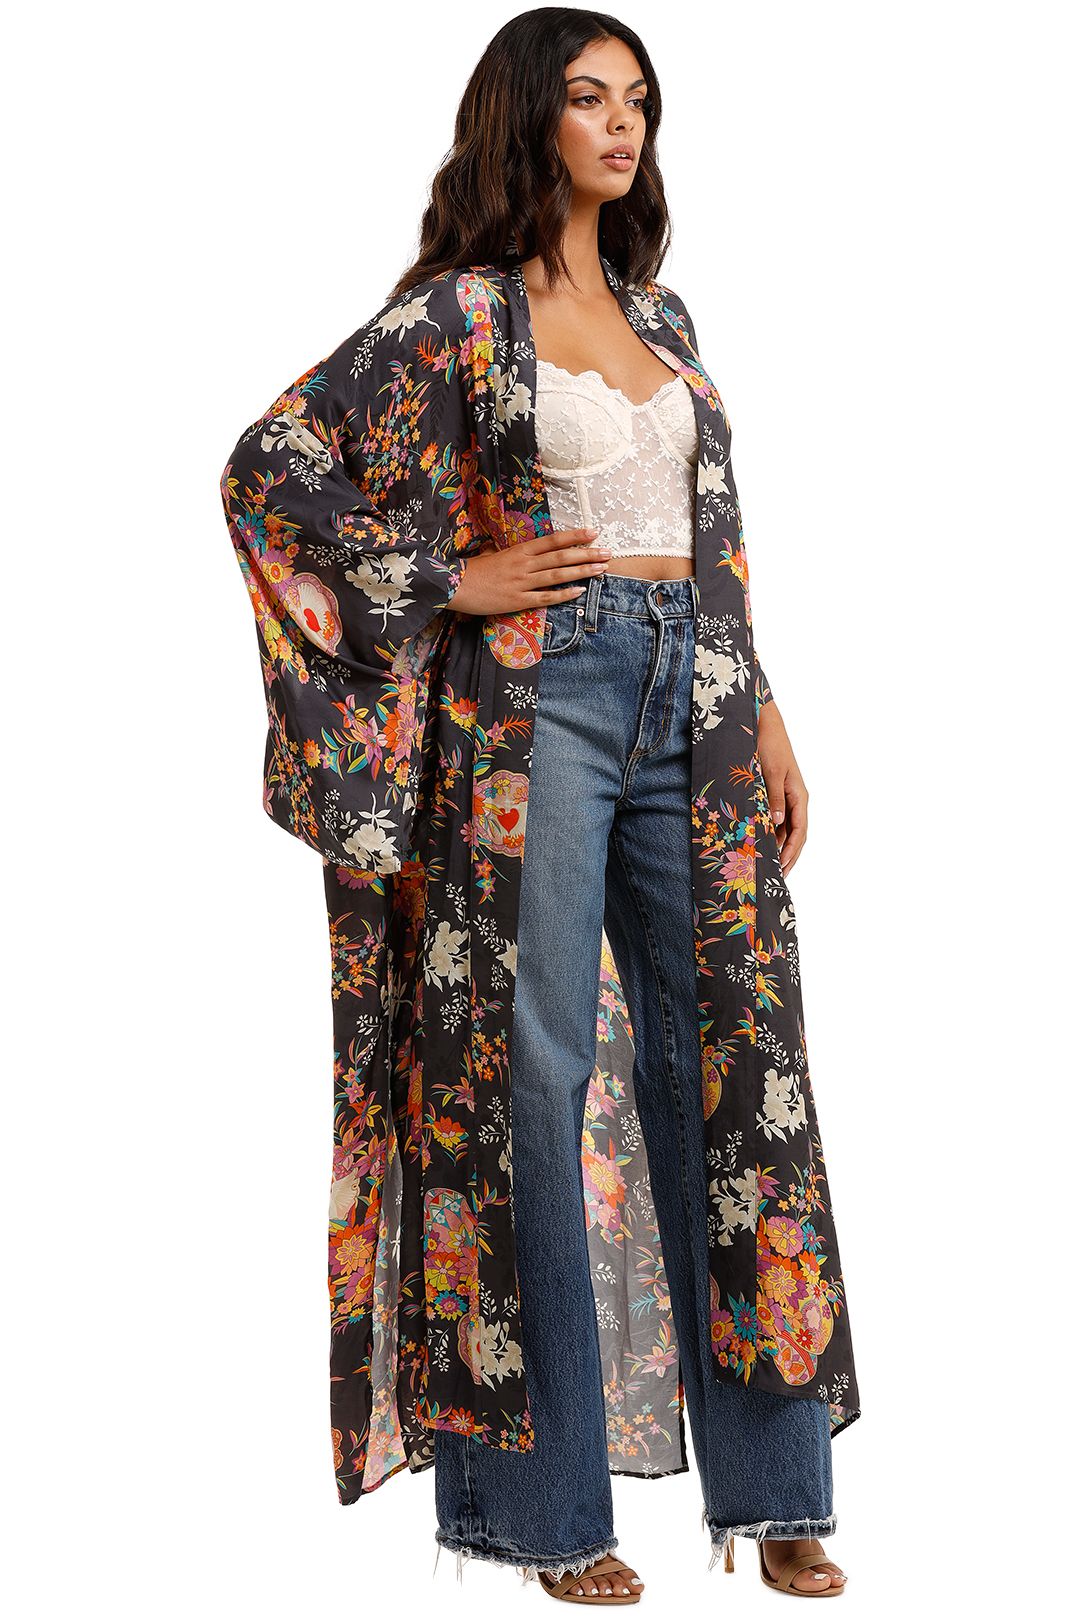 Spell Leo Maxi Robe Charcoal Floral